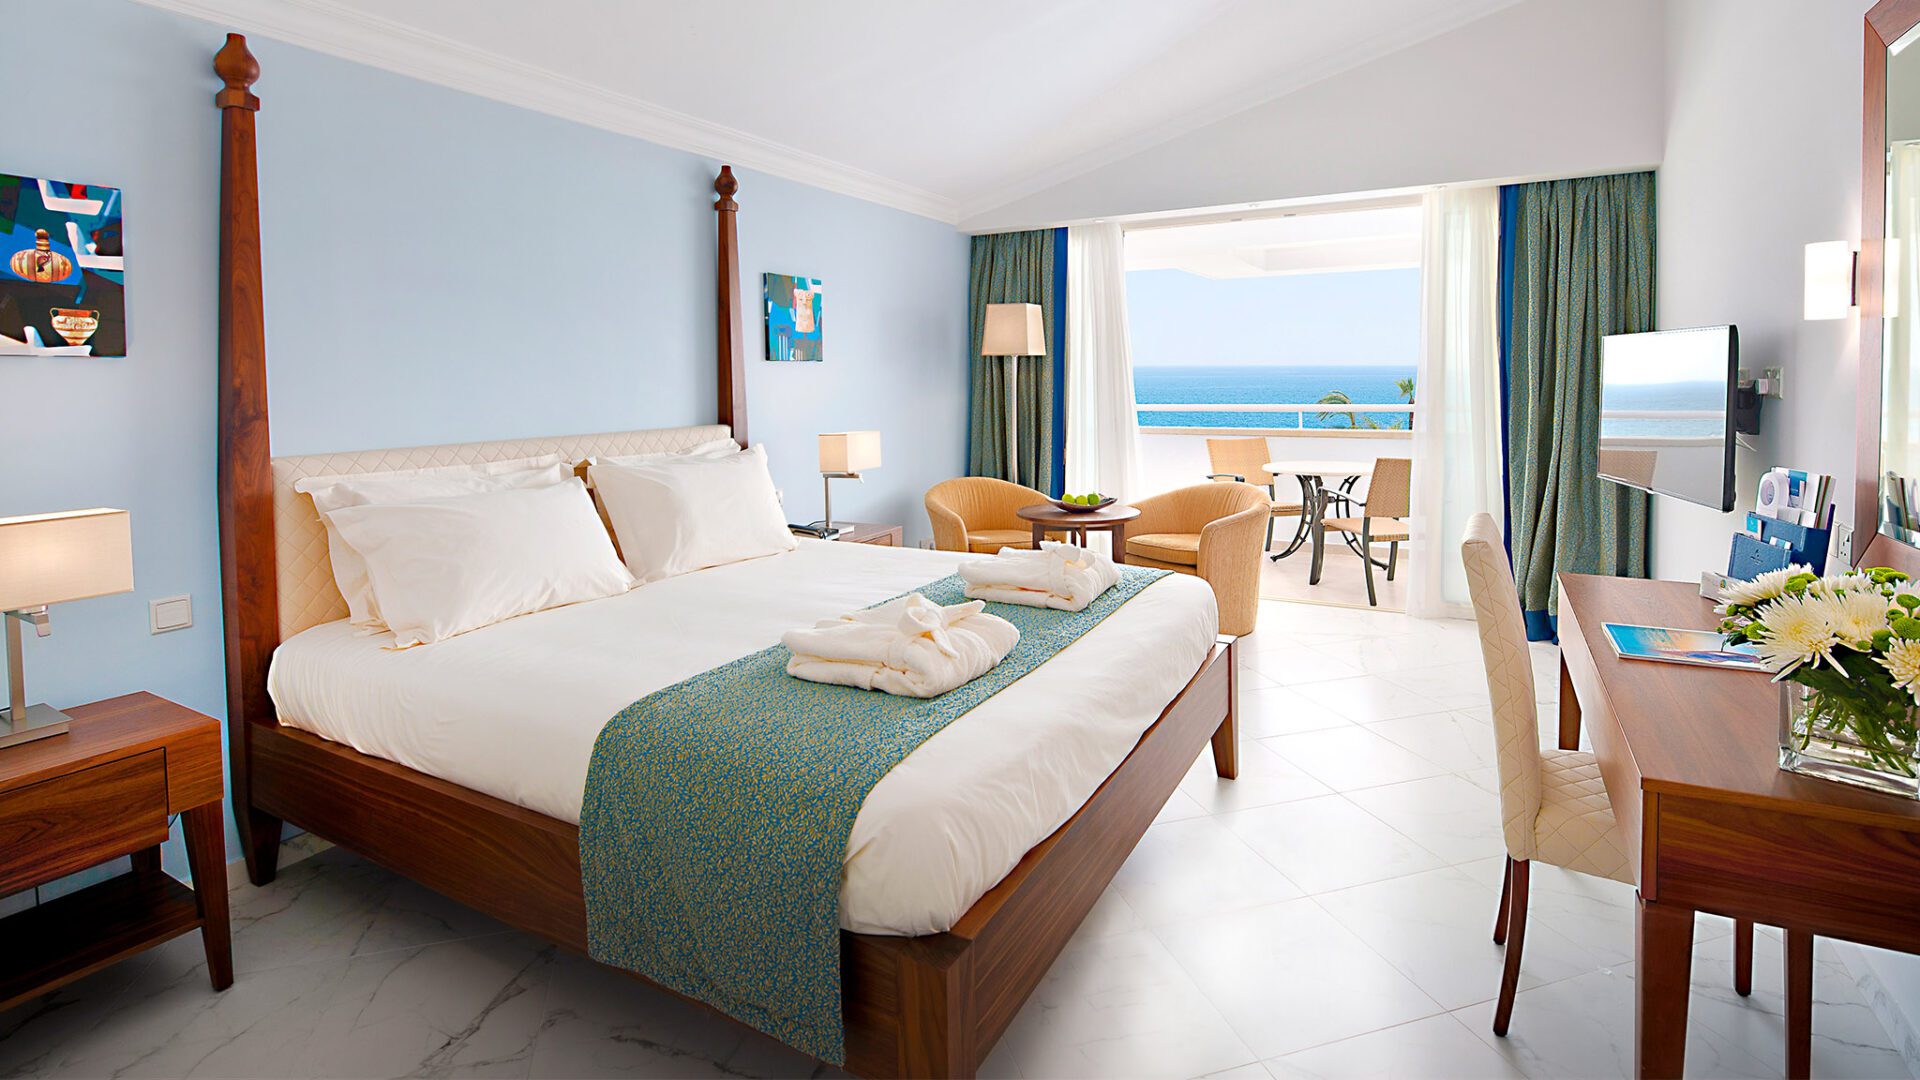 Deluxe Superior Room Sea View at Olympic Lagoon Resorts, Paphos